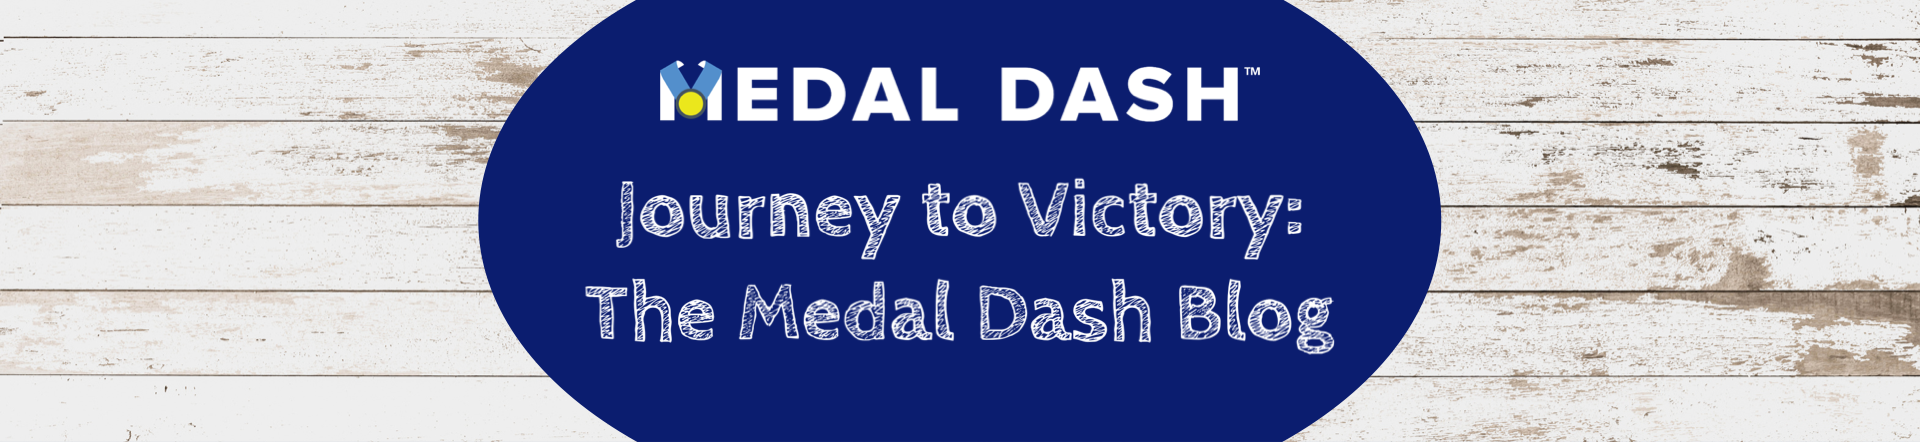 medal dash journey to victory the medal dash blog page